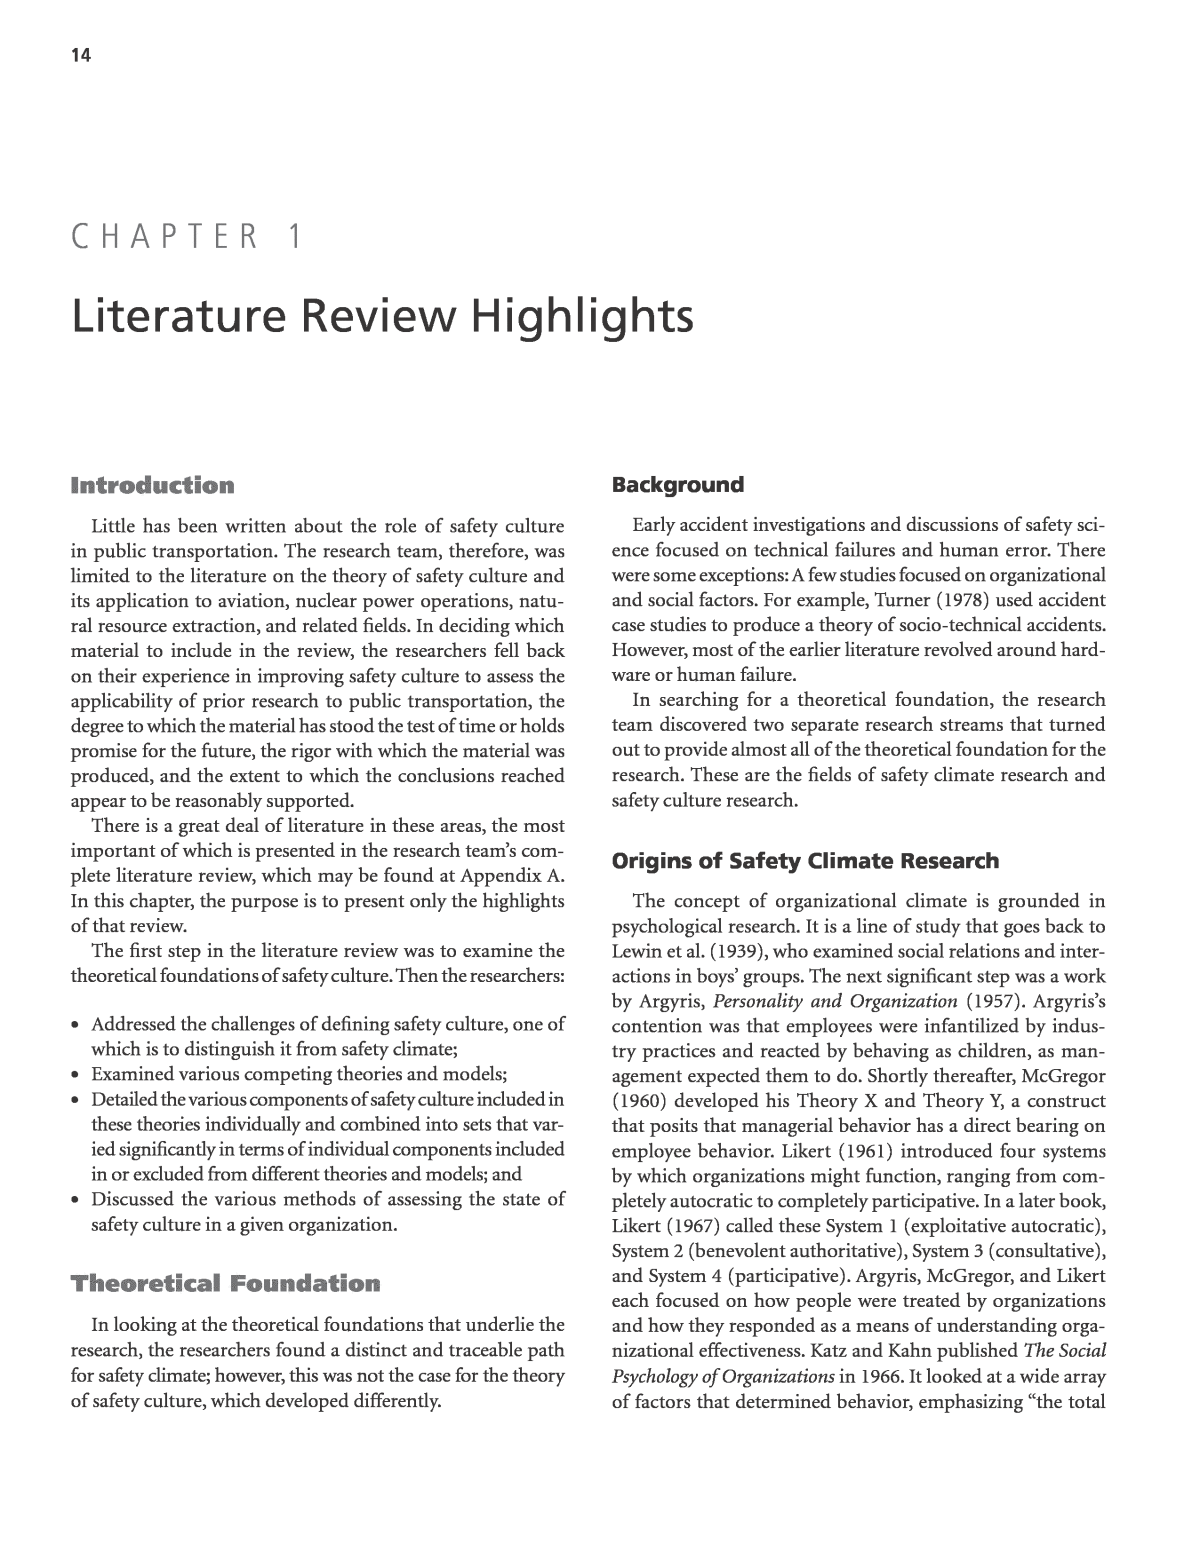 literature foundation in research example